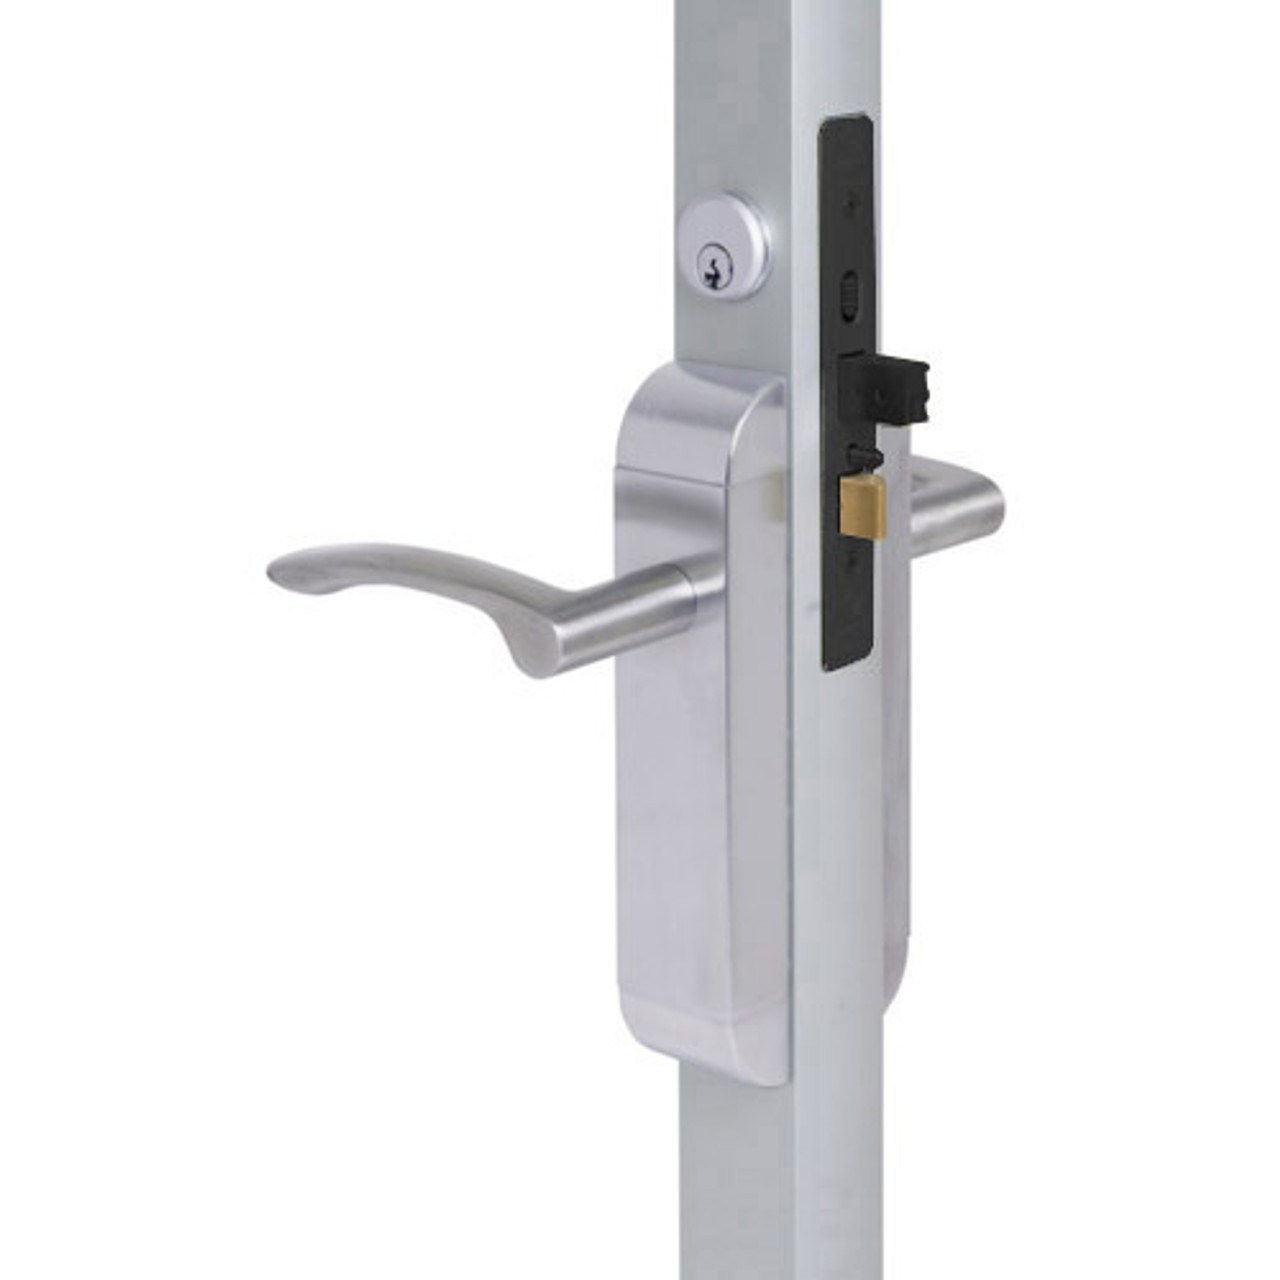 2190-433-302-32 Adams Rite Dual Force Interconnected 2190 series Deadlock/Deadlatch in Bright Stainless